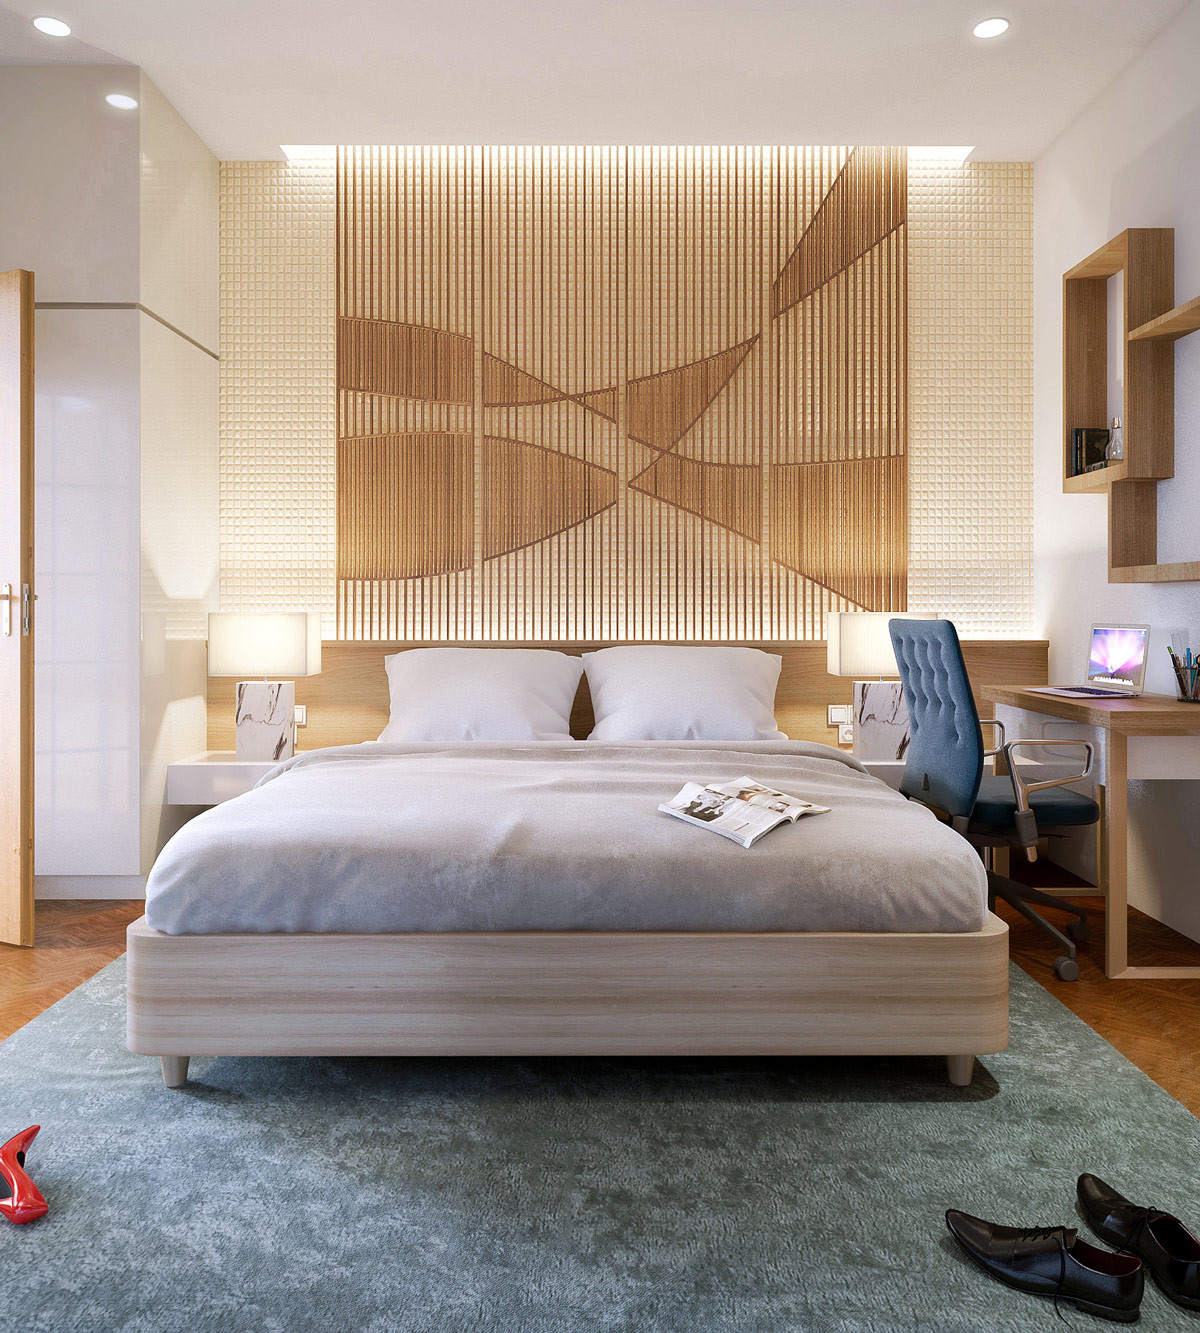 Accent Wall For Bedroom
 25 Beautiful Examples Bedroom Accent Walls That Use